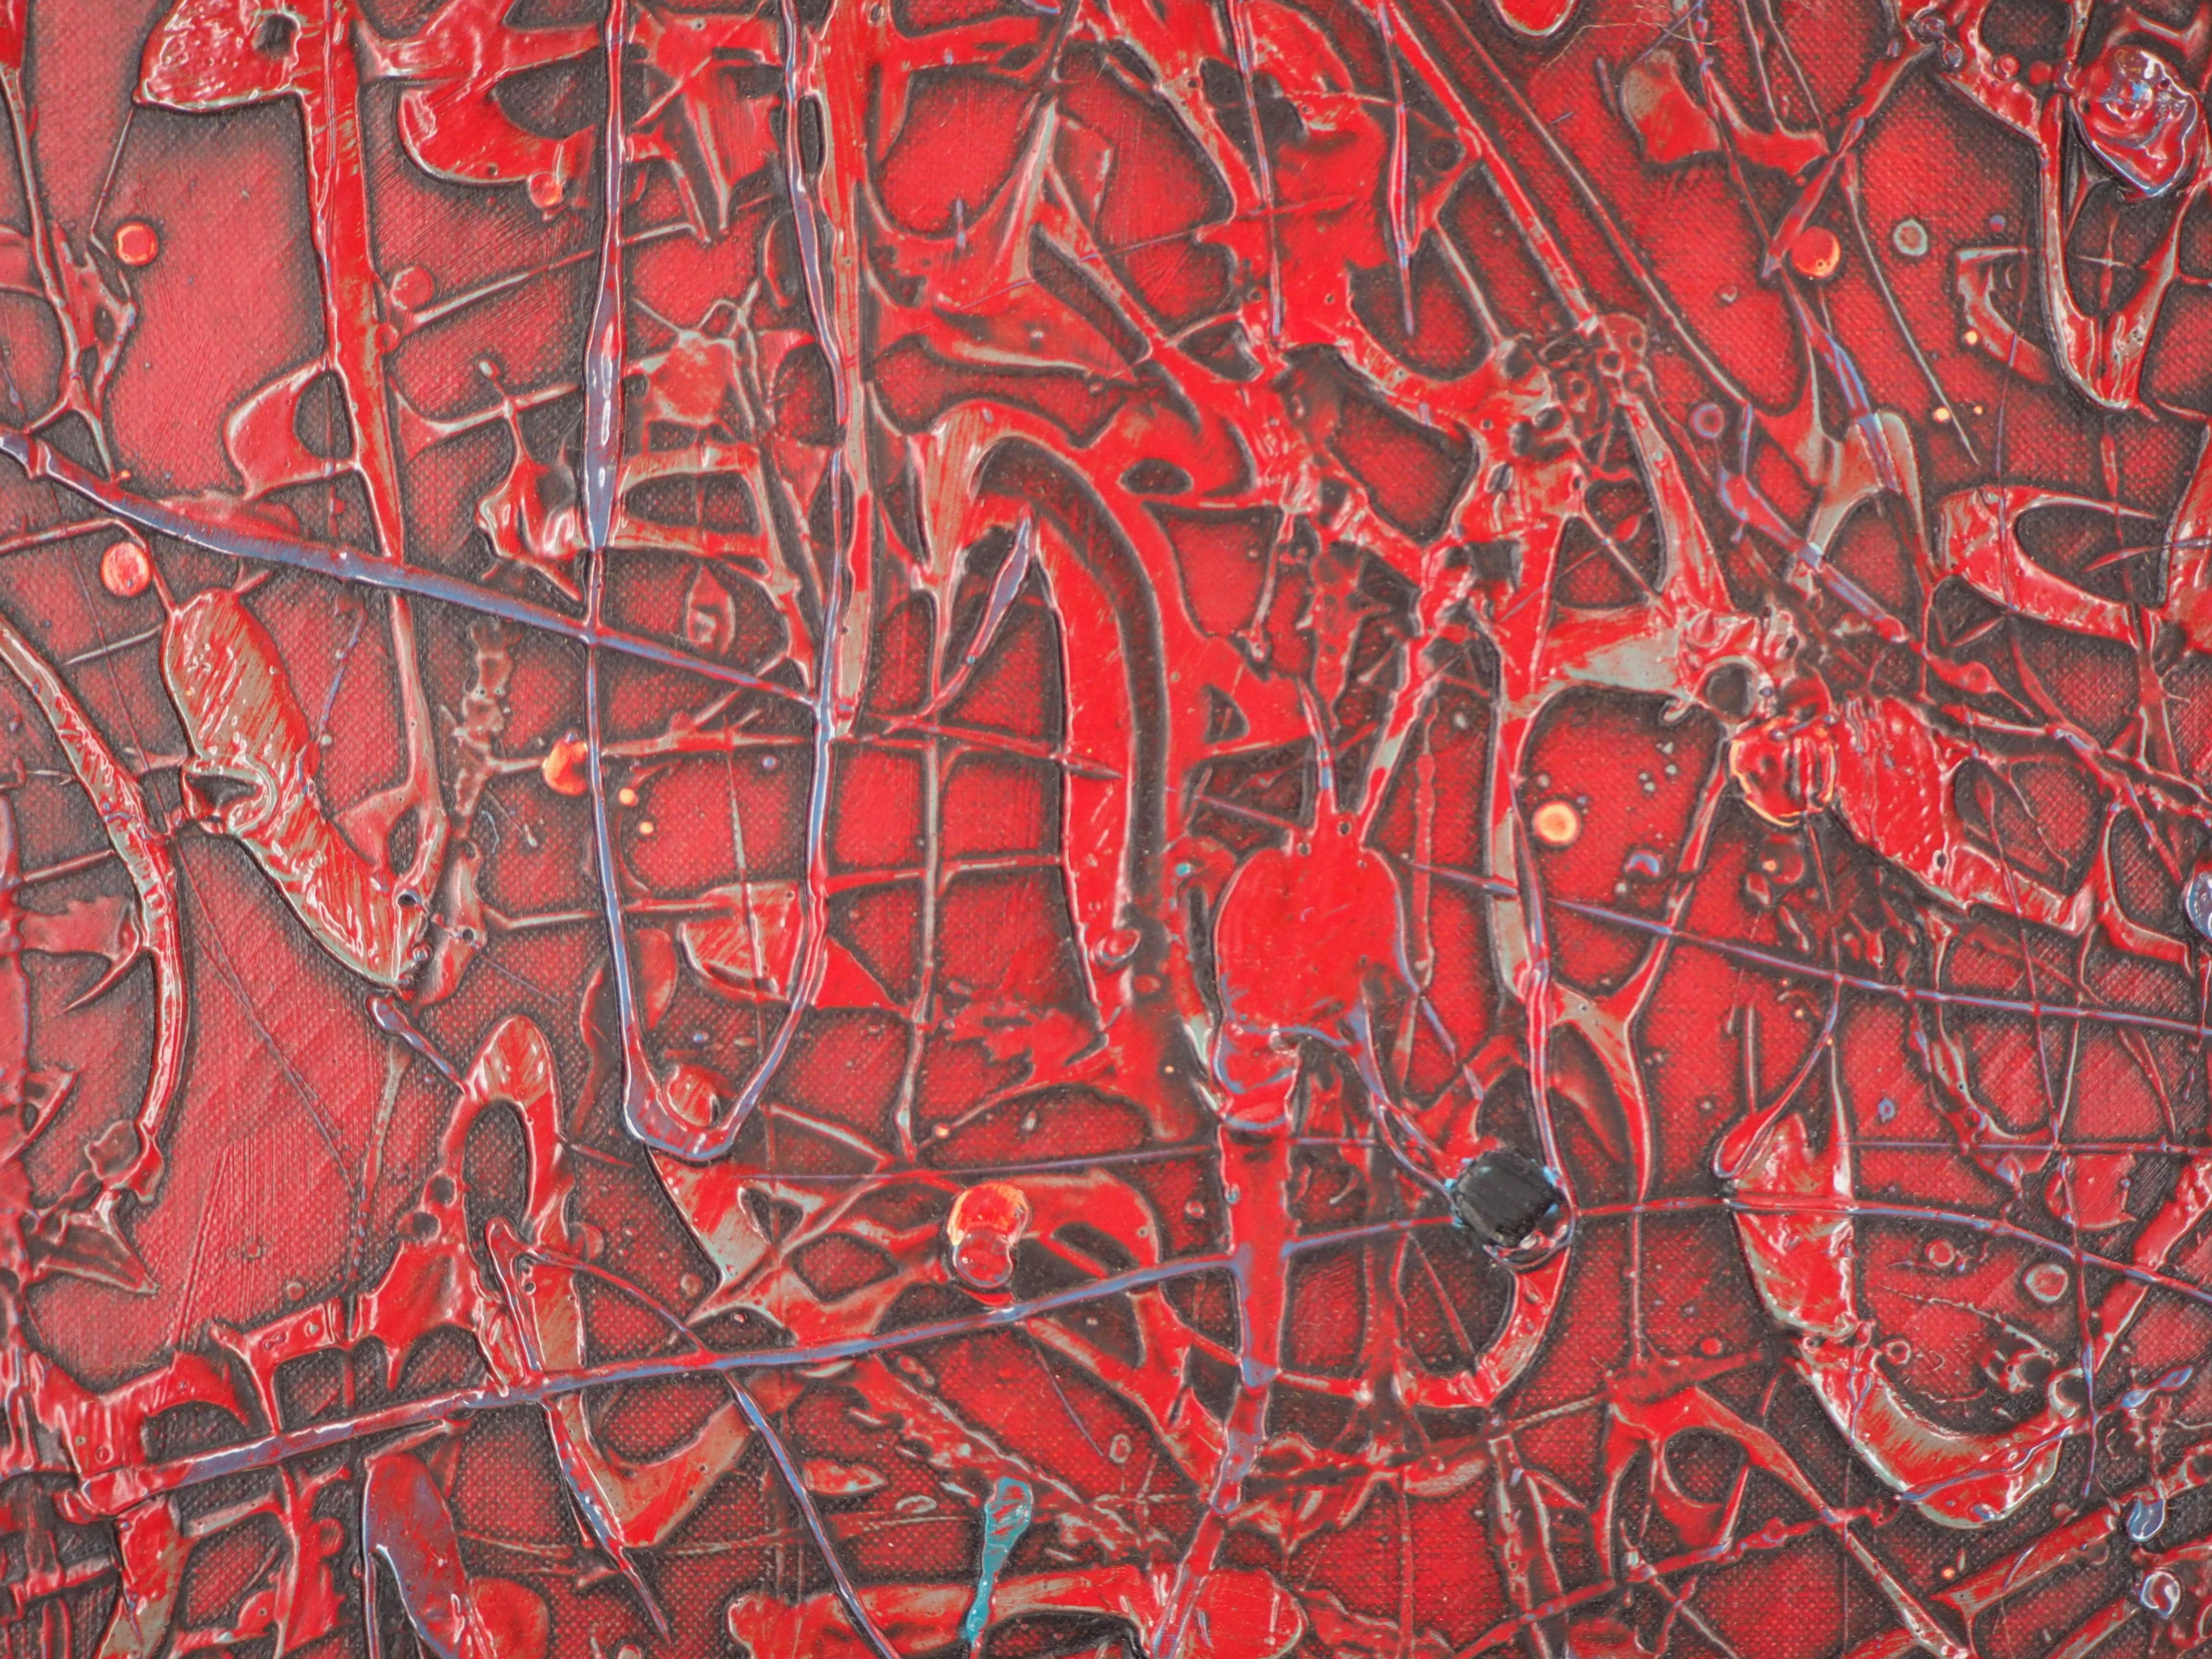 Abstraction in Red - Original oil on canvas - Signed For Sale 2